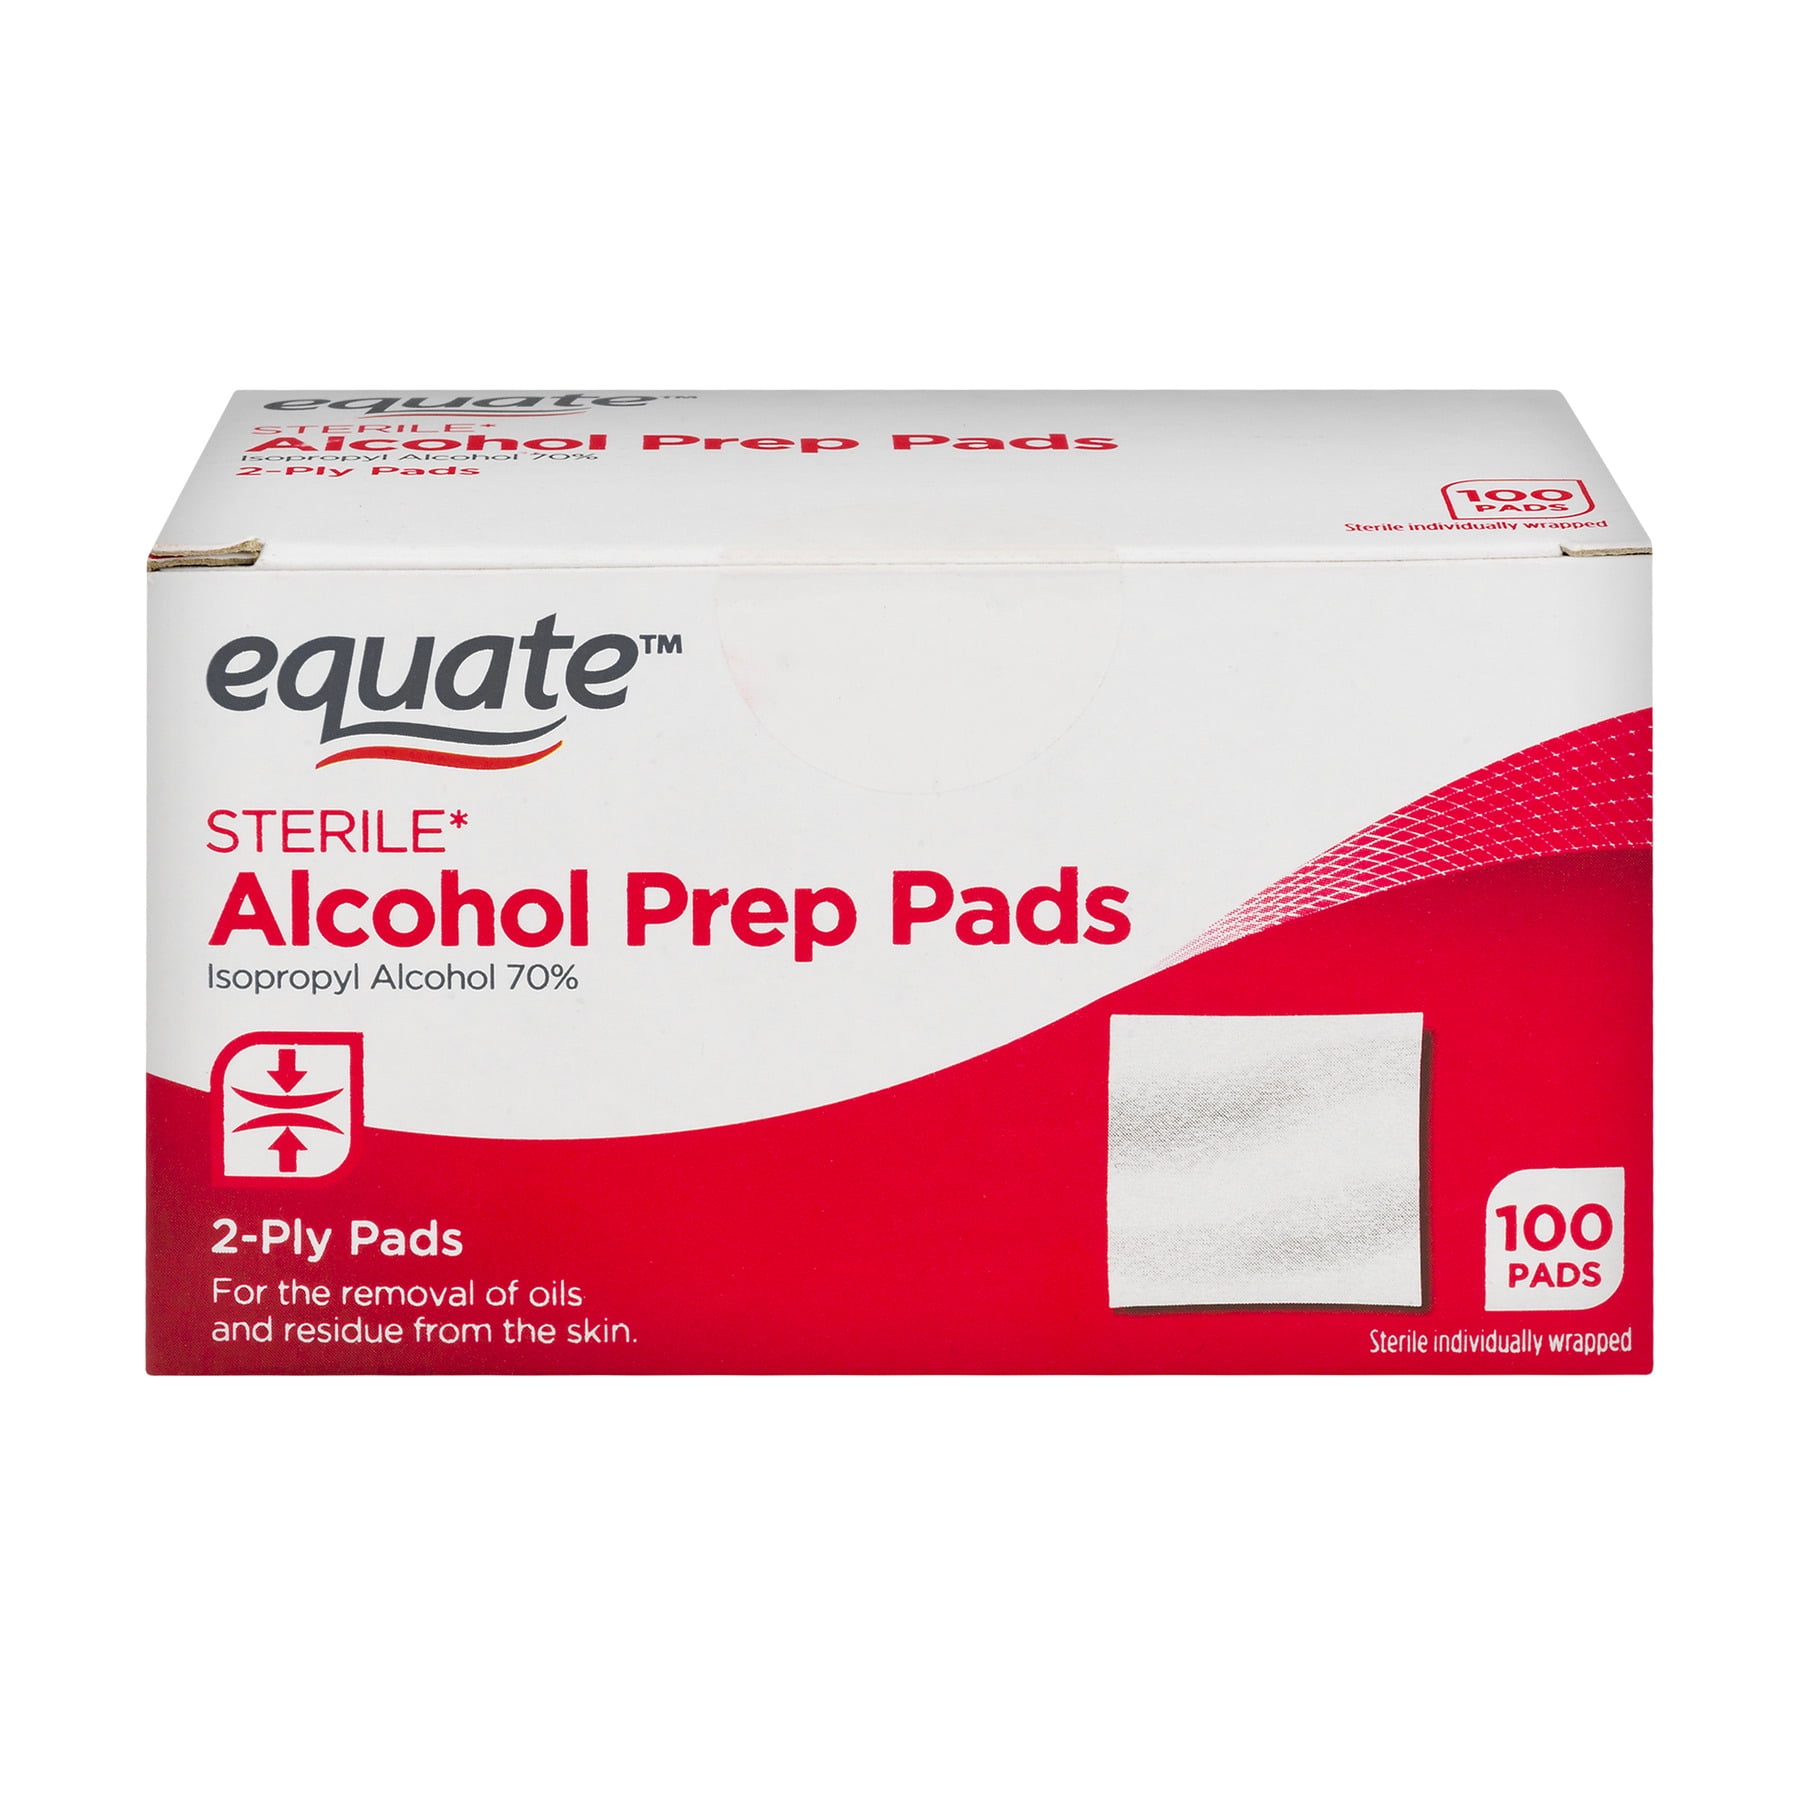 Equate Sterile Alcohol Prep Pads, 100 Count